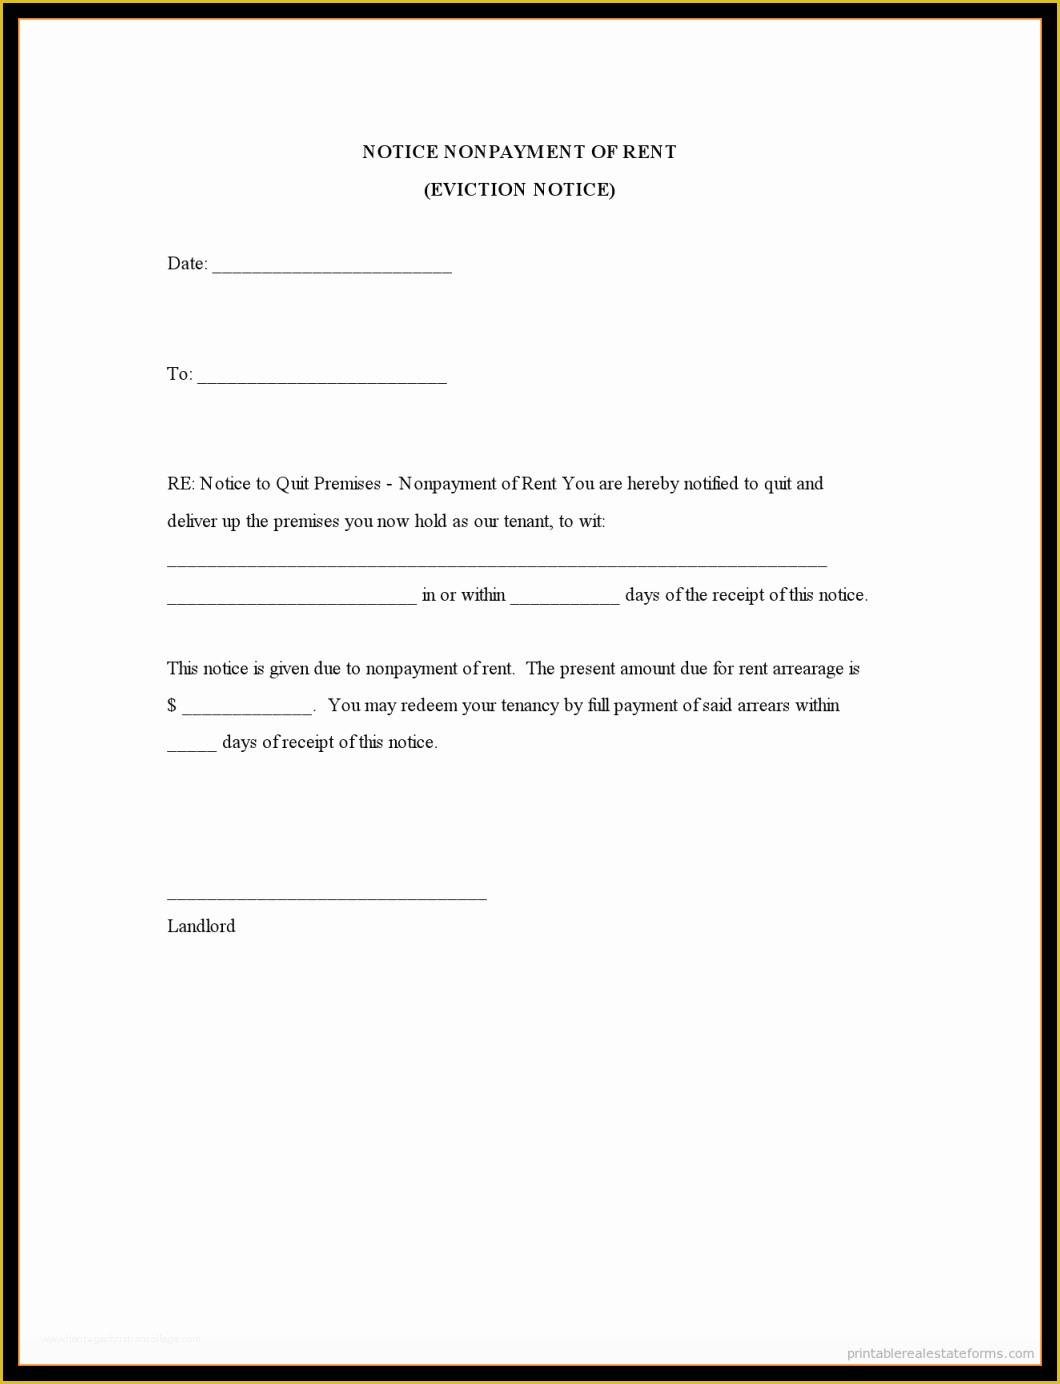 Free Eviction Template Of Notice